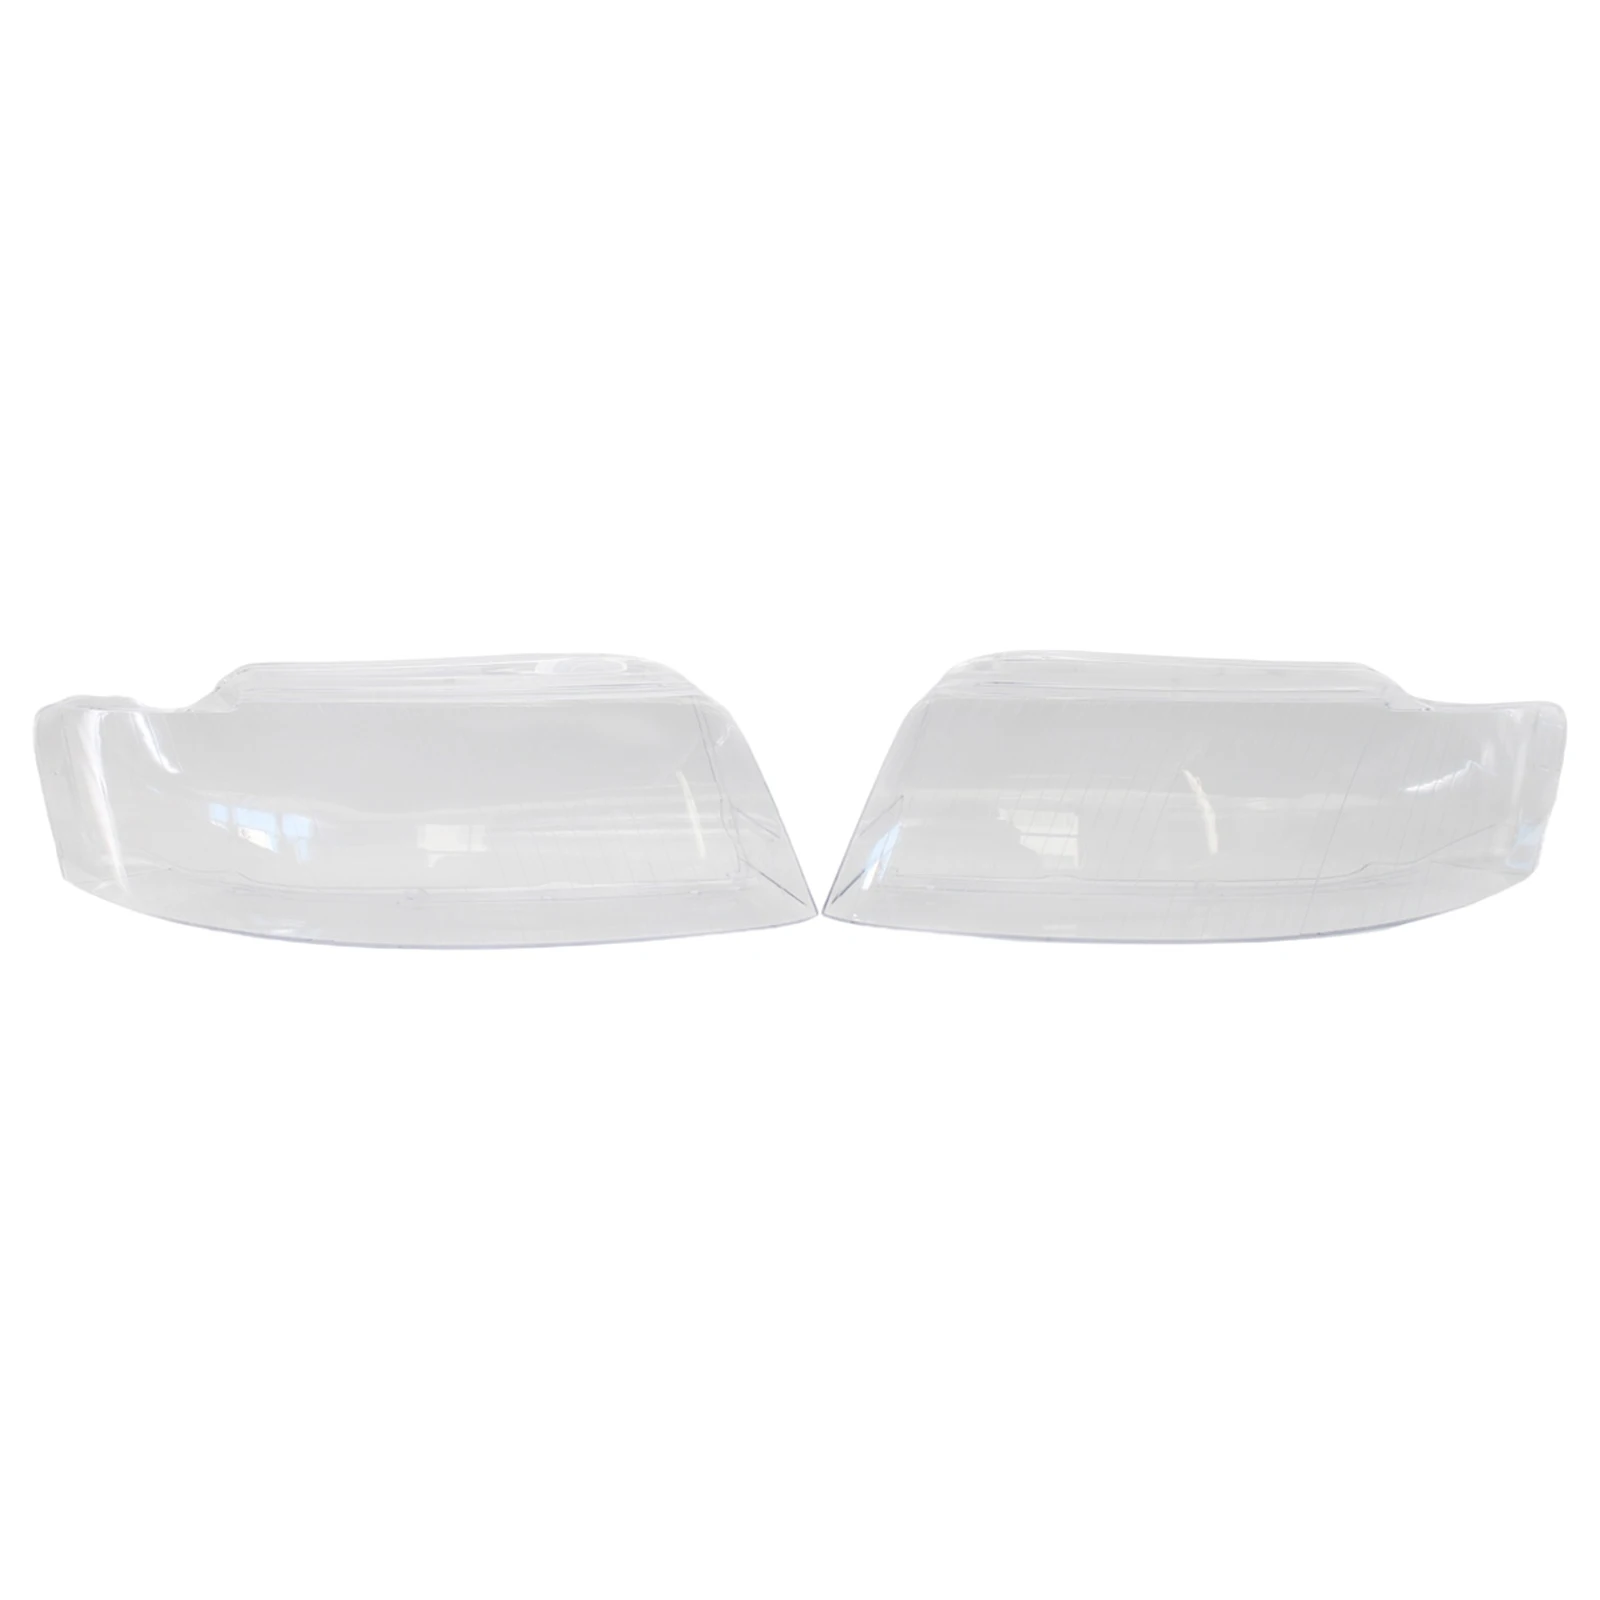 Automotive Pair Headlight Lens Cover Clear Shell for  A4 8E B6 2002-2004